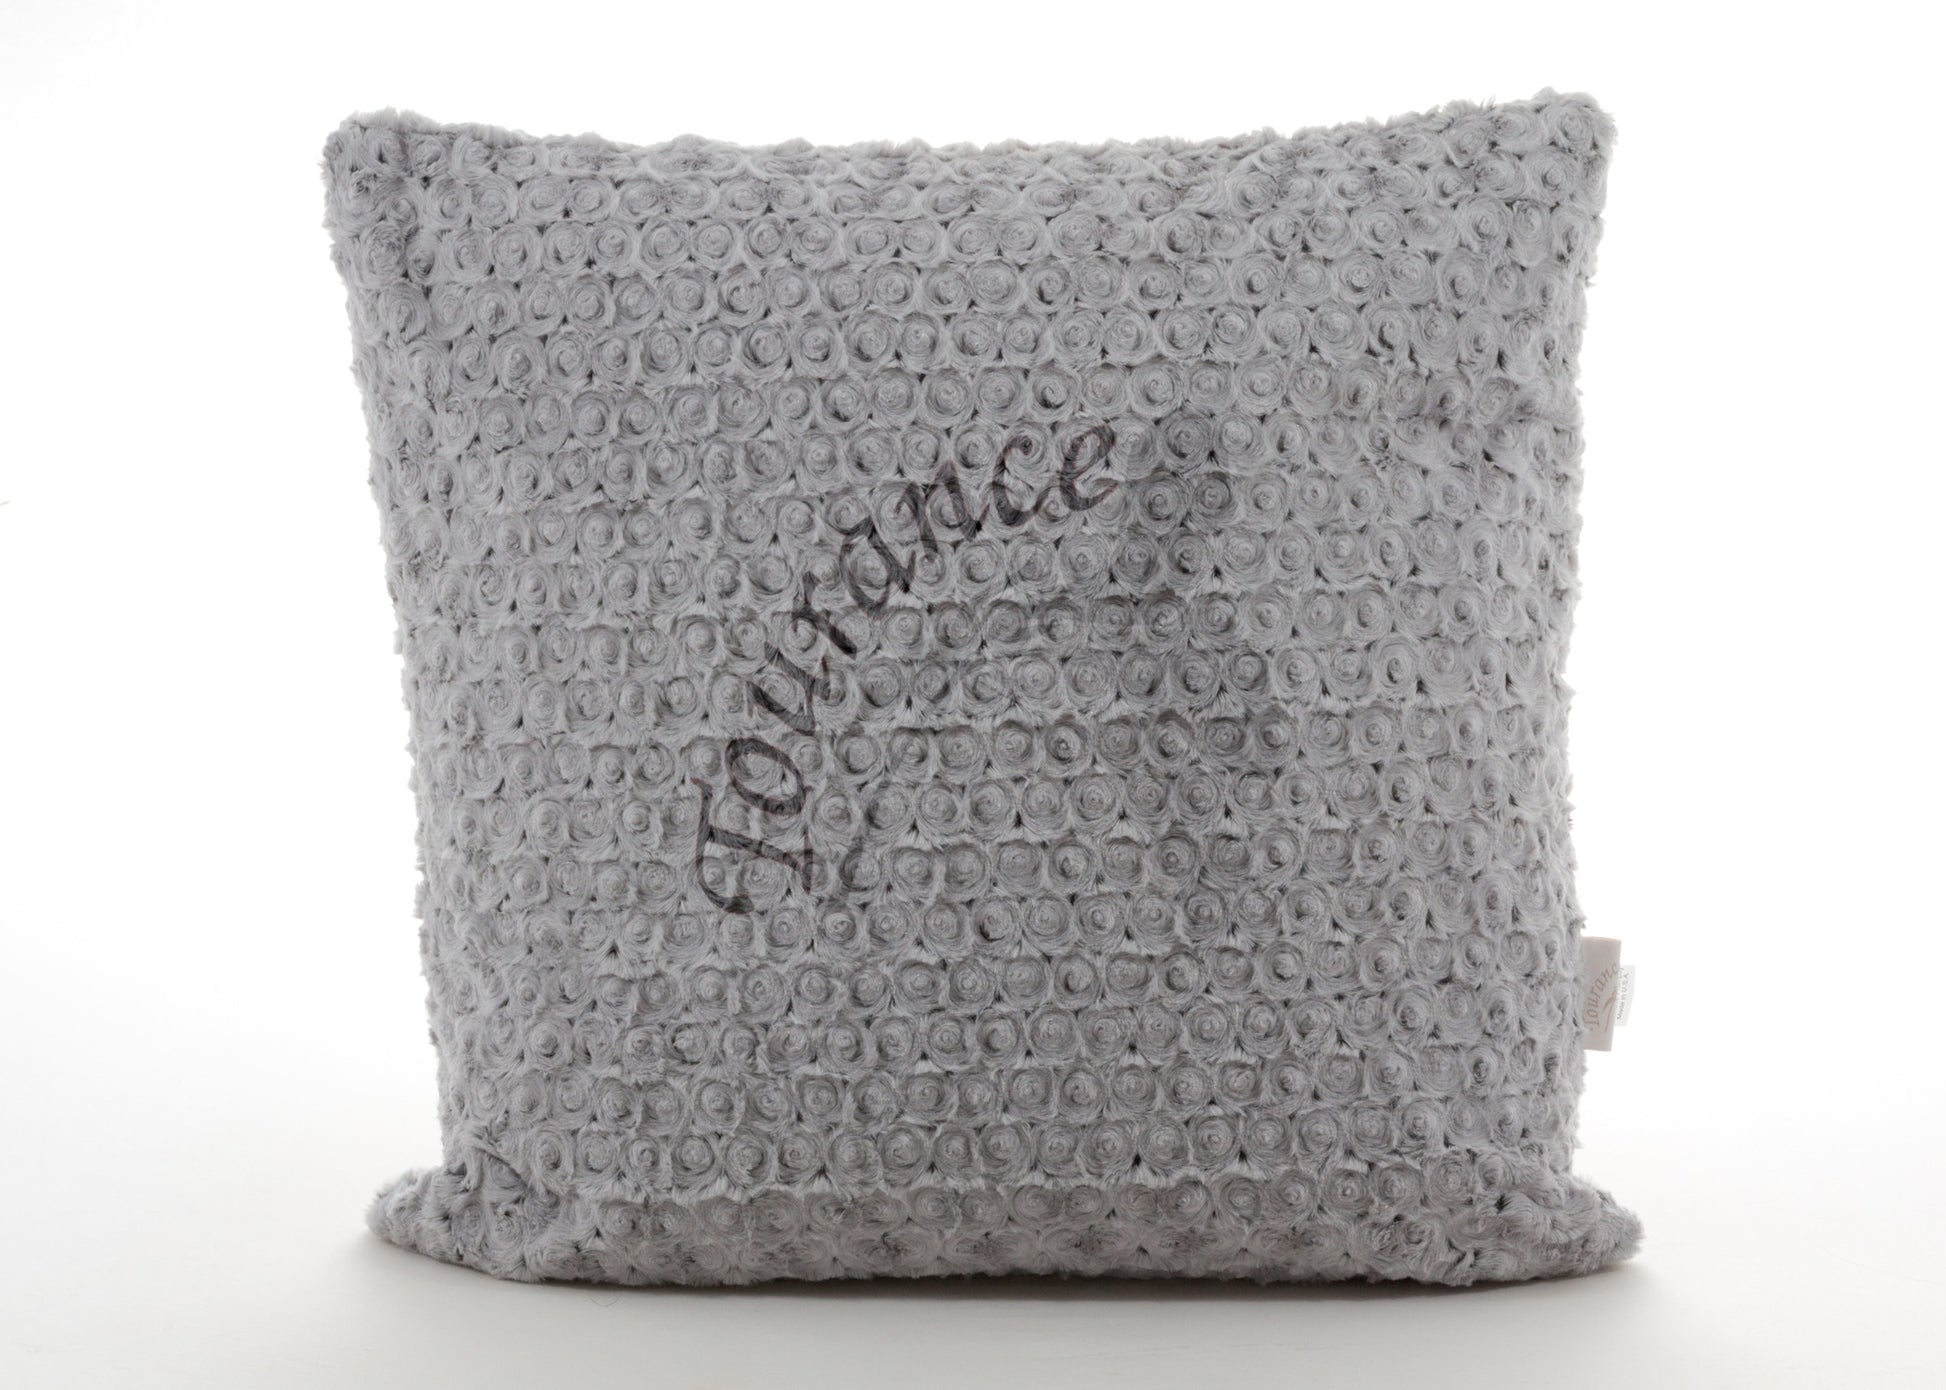 Rosebud Duotone Square Pillow in Silver & Charcoal